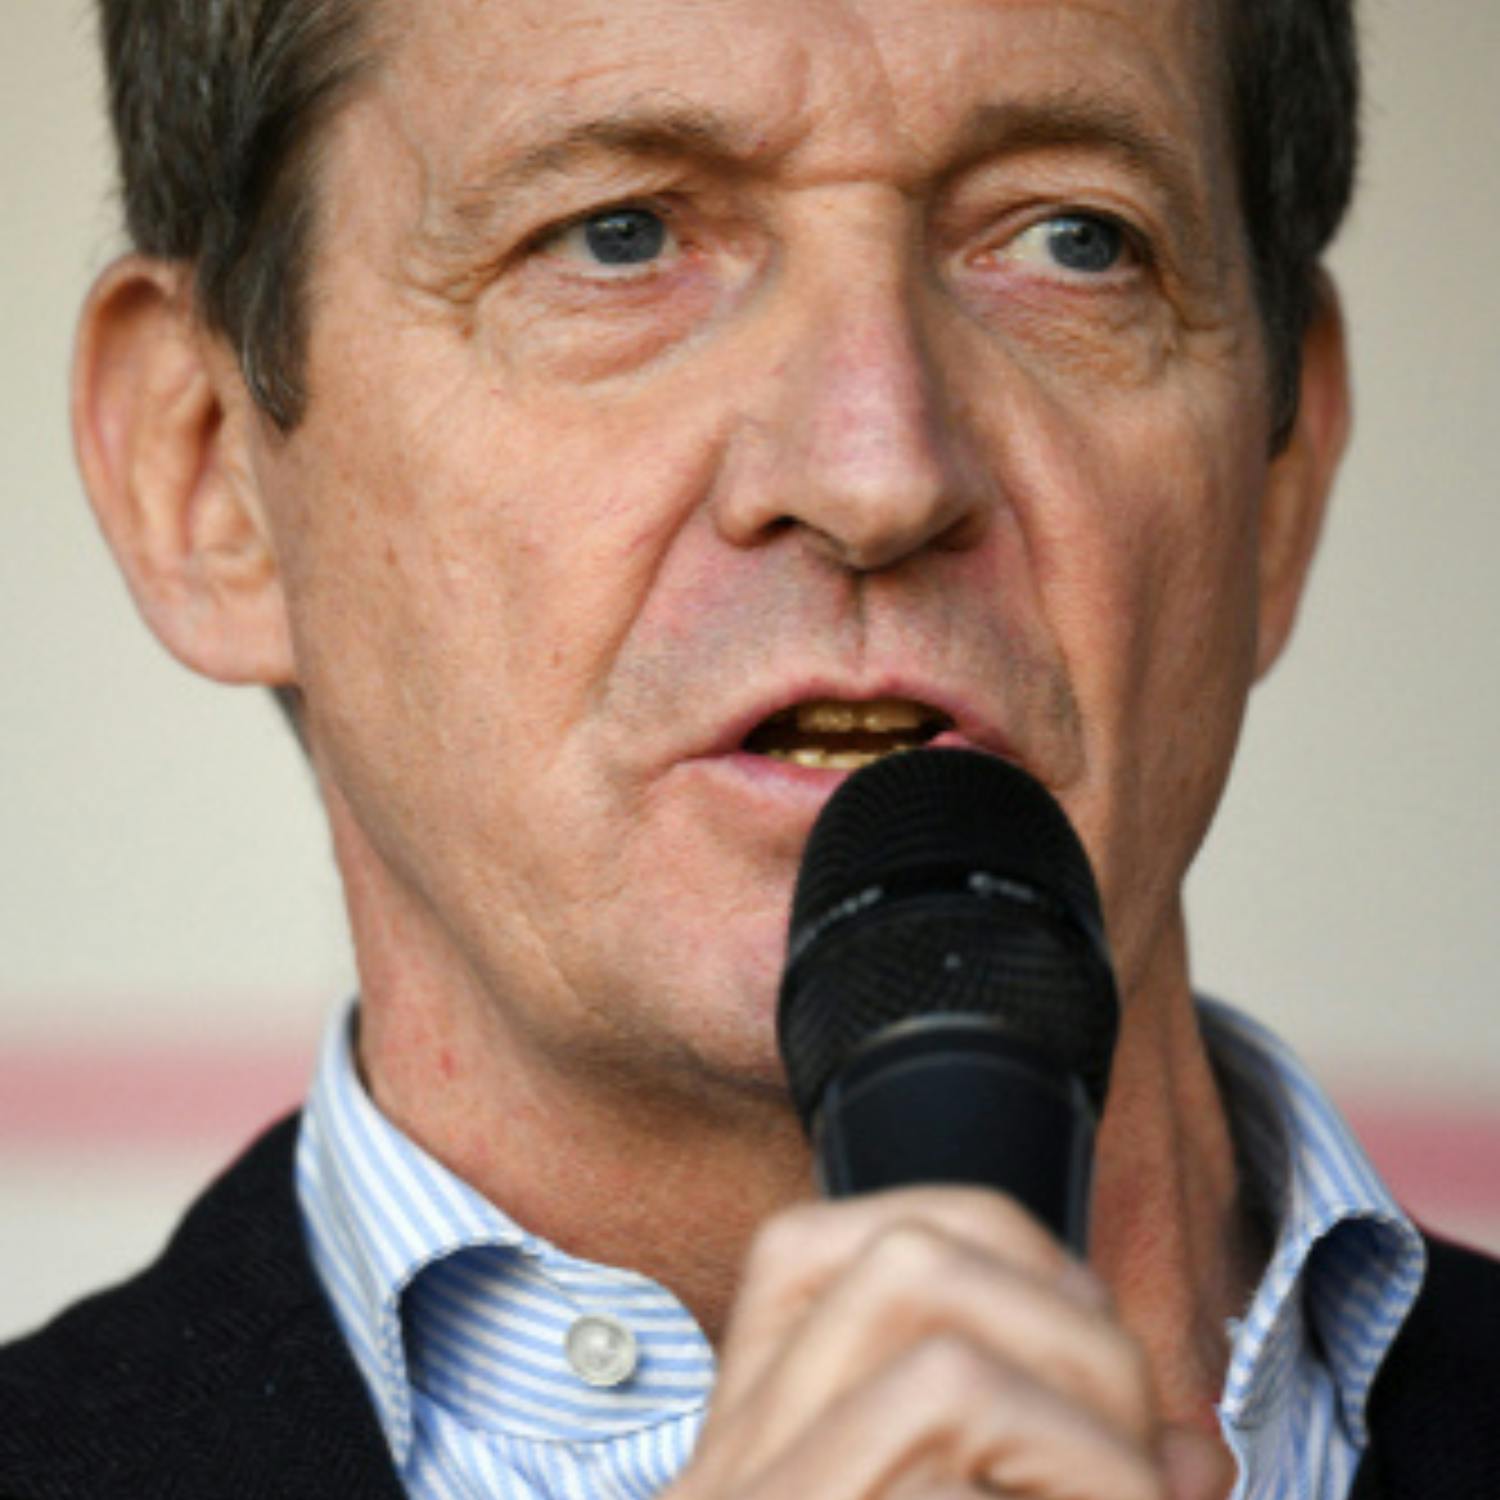 Alastair Campbell on Labour party’s relationship with Israel and Trump